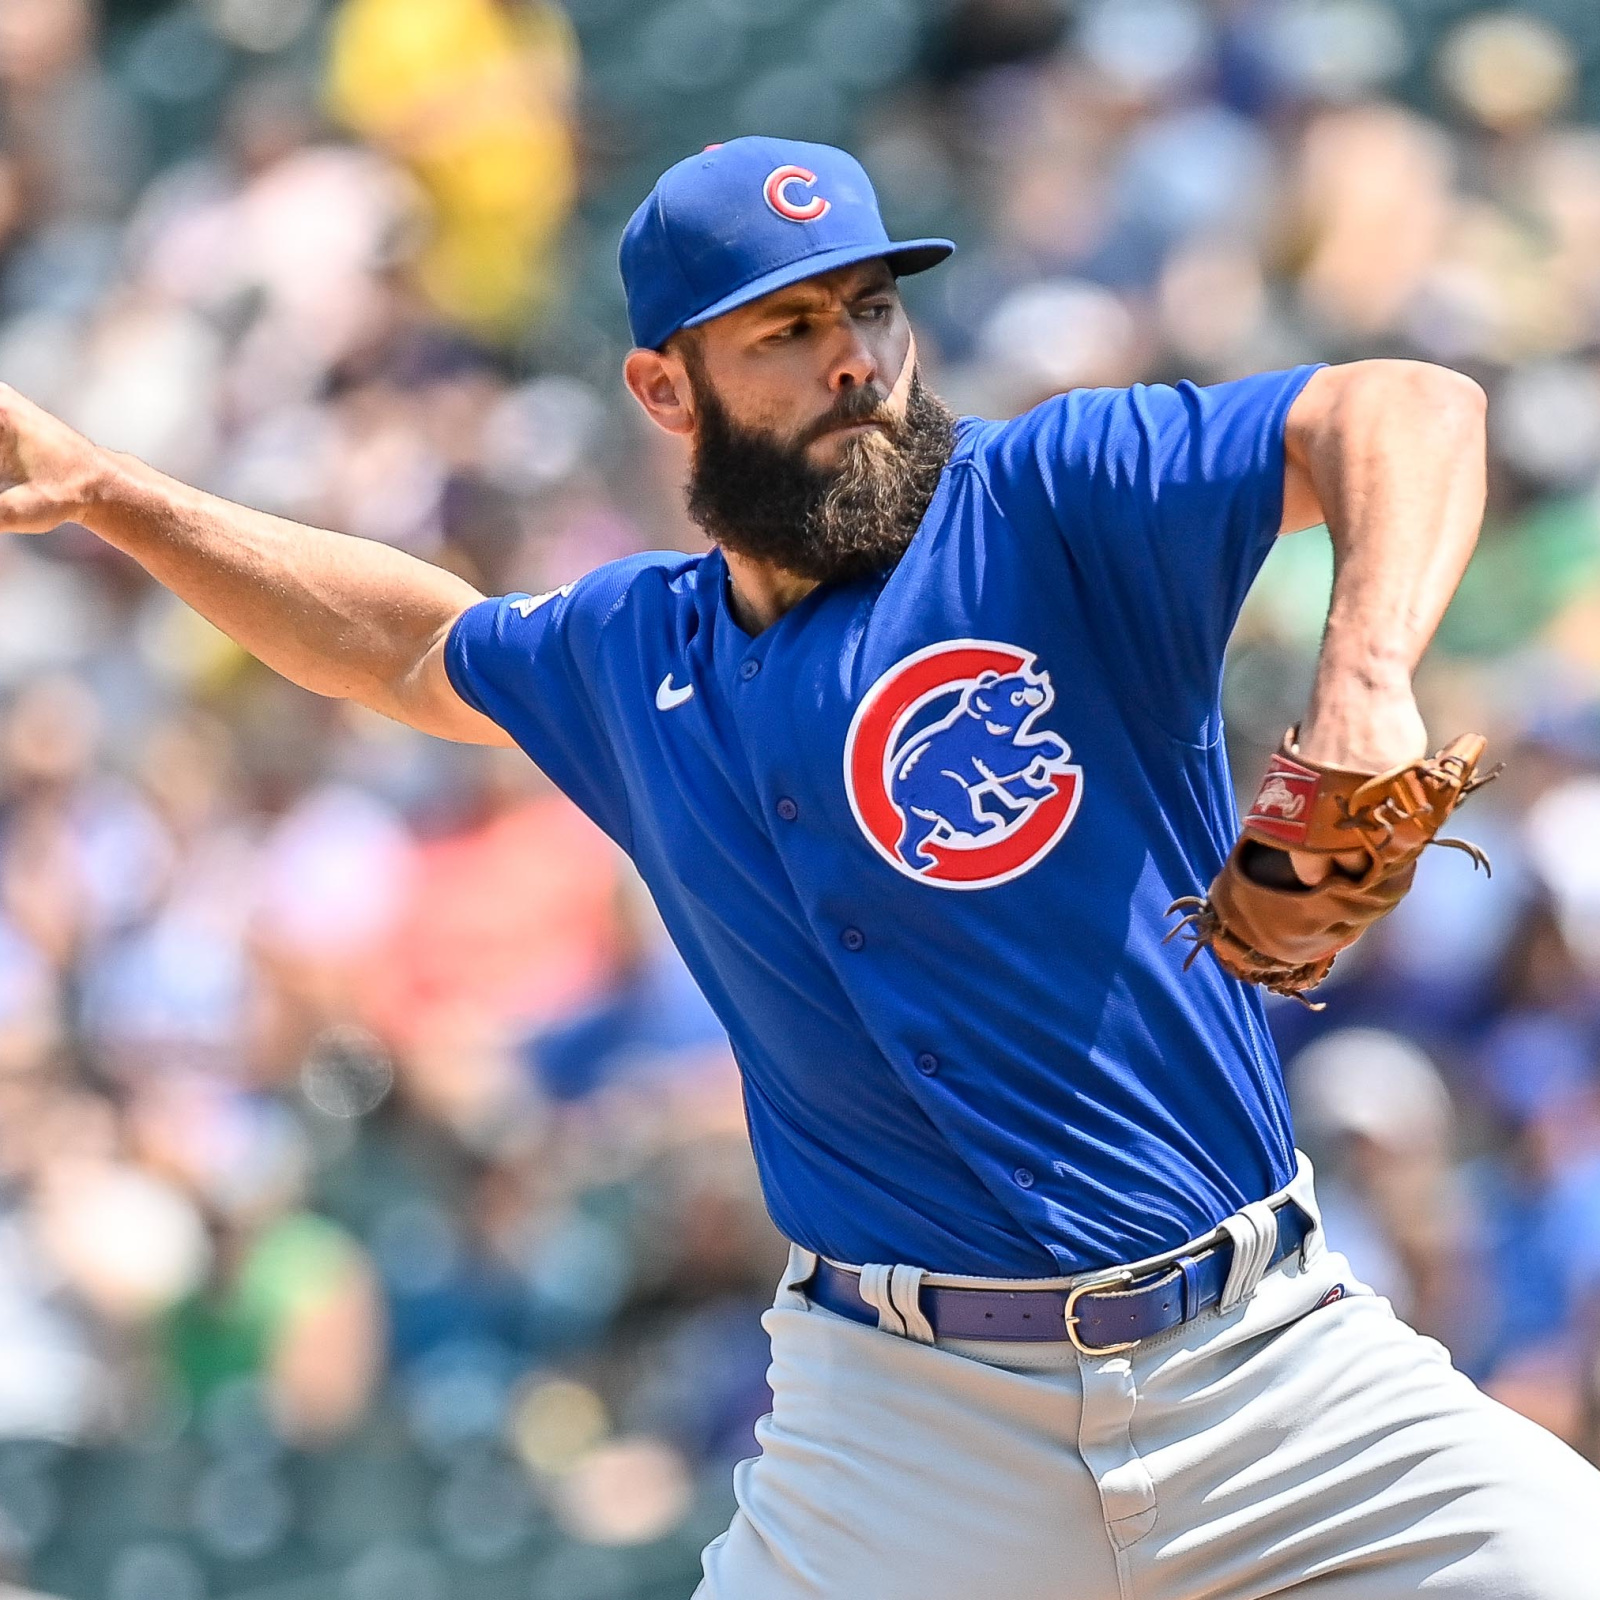 Jake Arrieta tipped his cap to the fans, but he isn't ready to leave the  Cubs - The Athletic